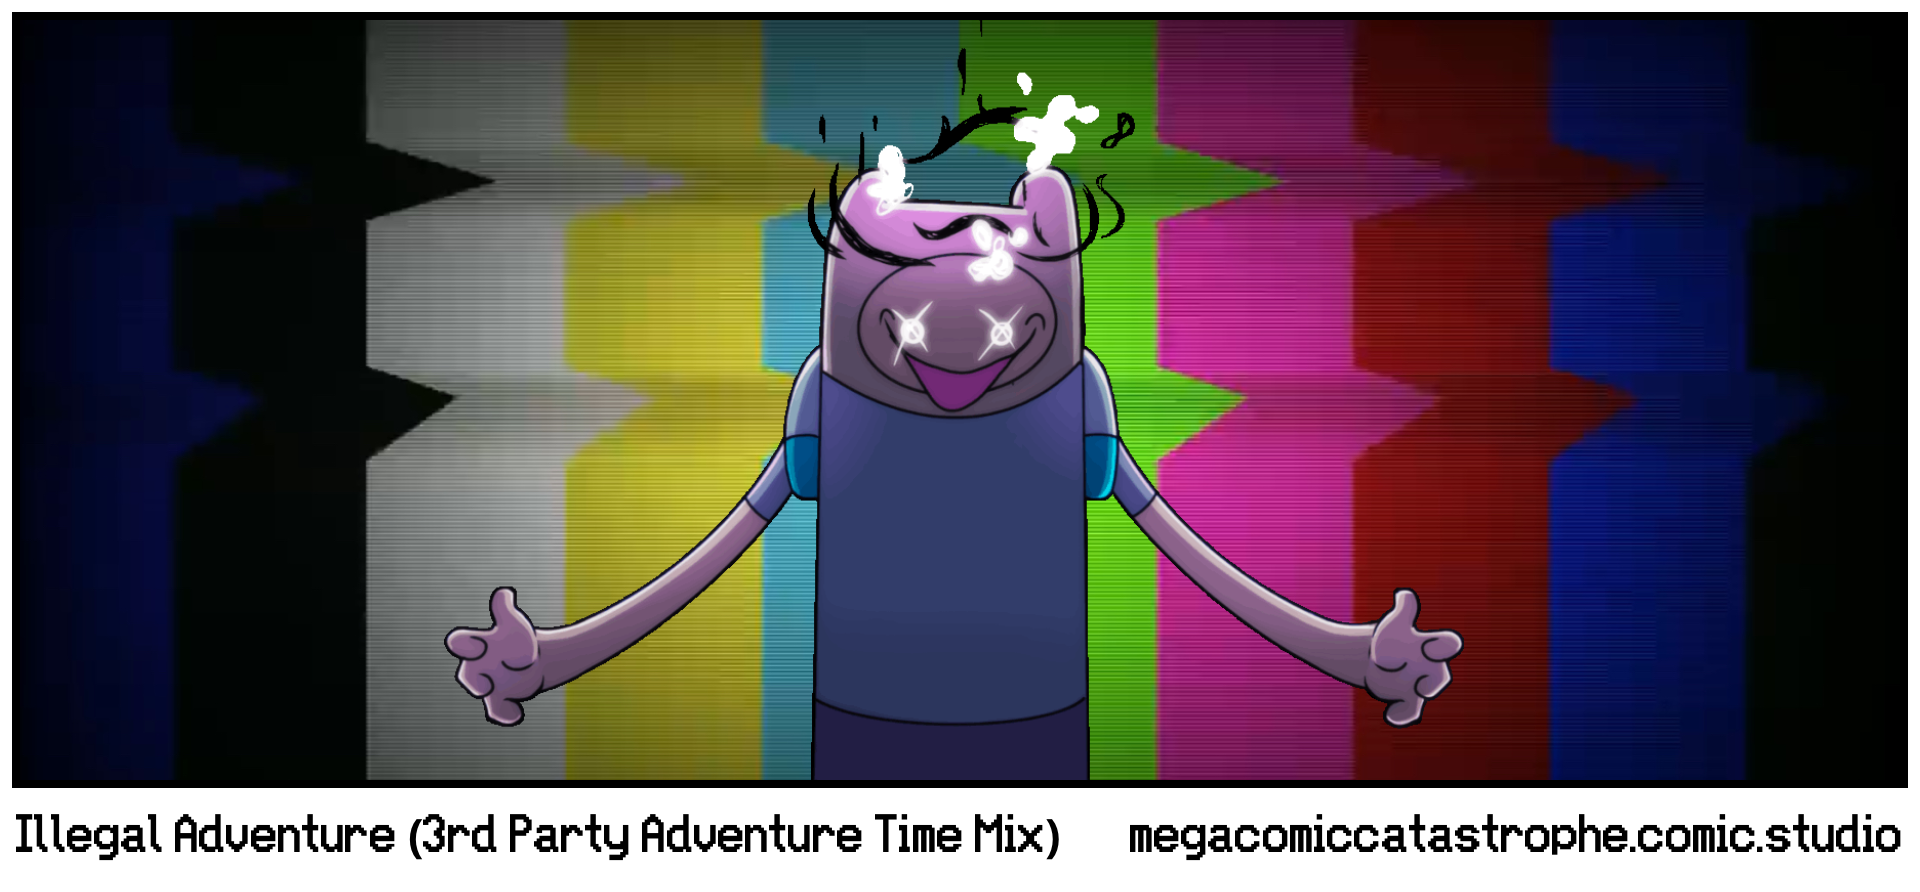 Illegal Adventure (3rd Party Adventure Time Mix)